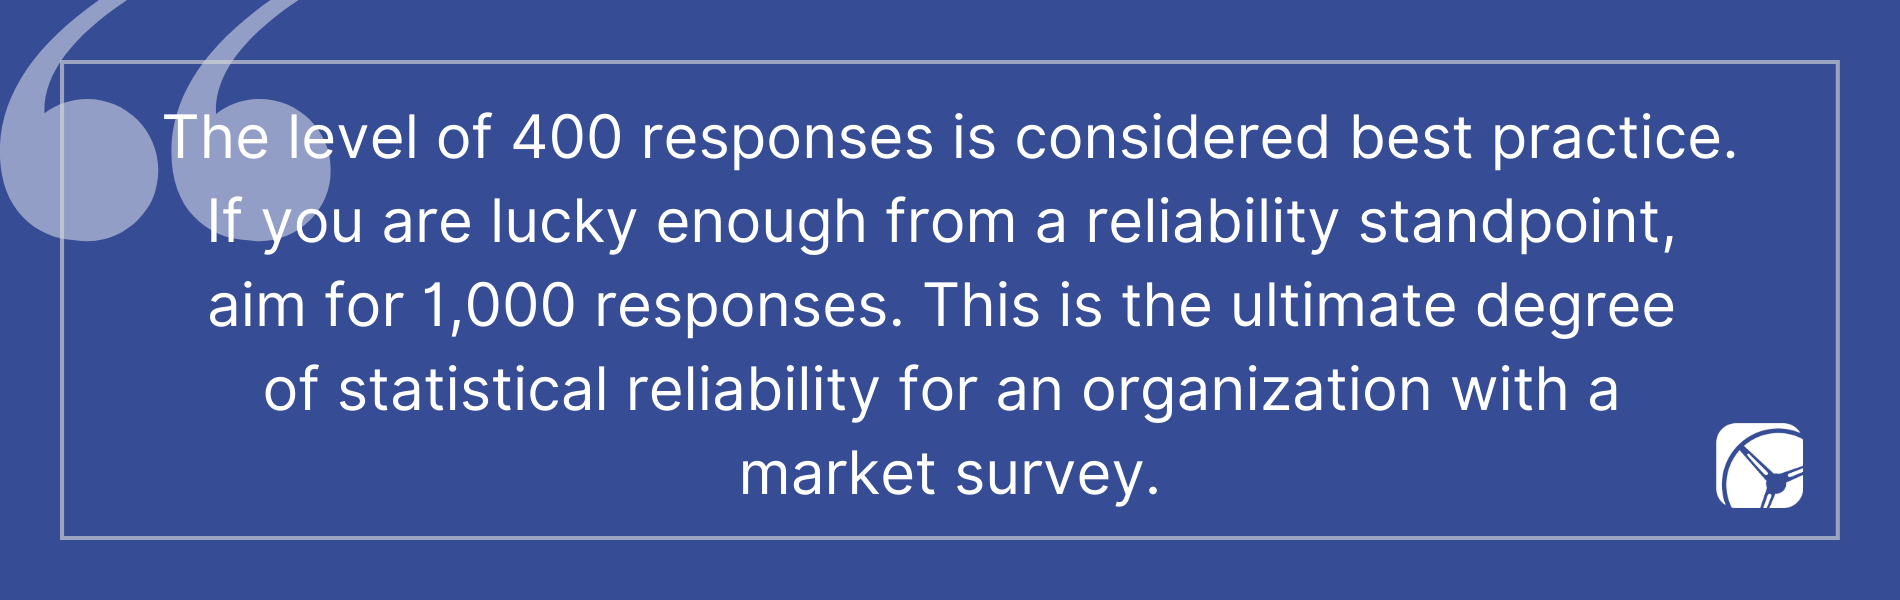 The level of 400 responses is considered best practice. If you are lucky enough from a reliability standpoint,  aim for 1,000 responses. This is the ultimate degree  of statistical reliability for an organization with a  market survey.